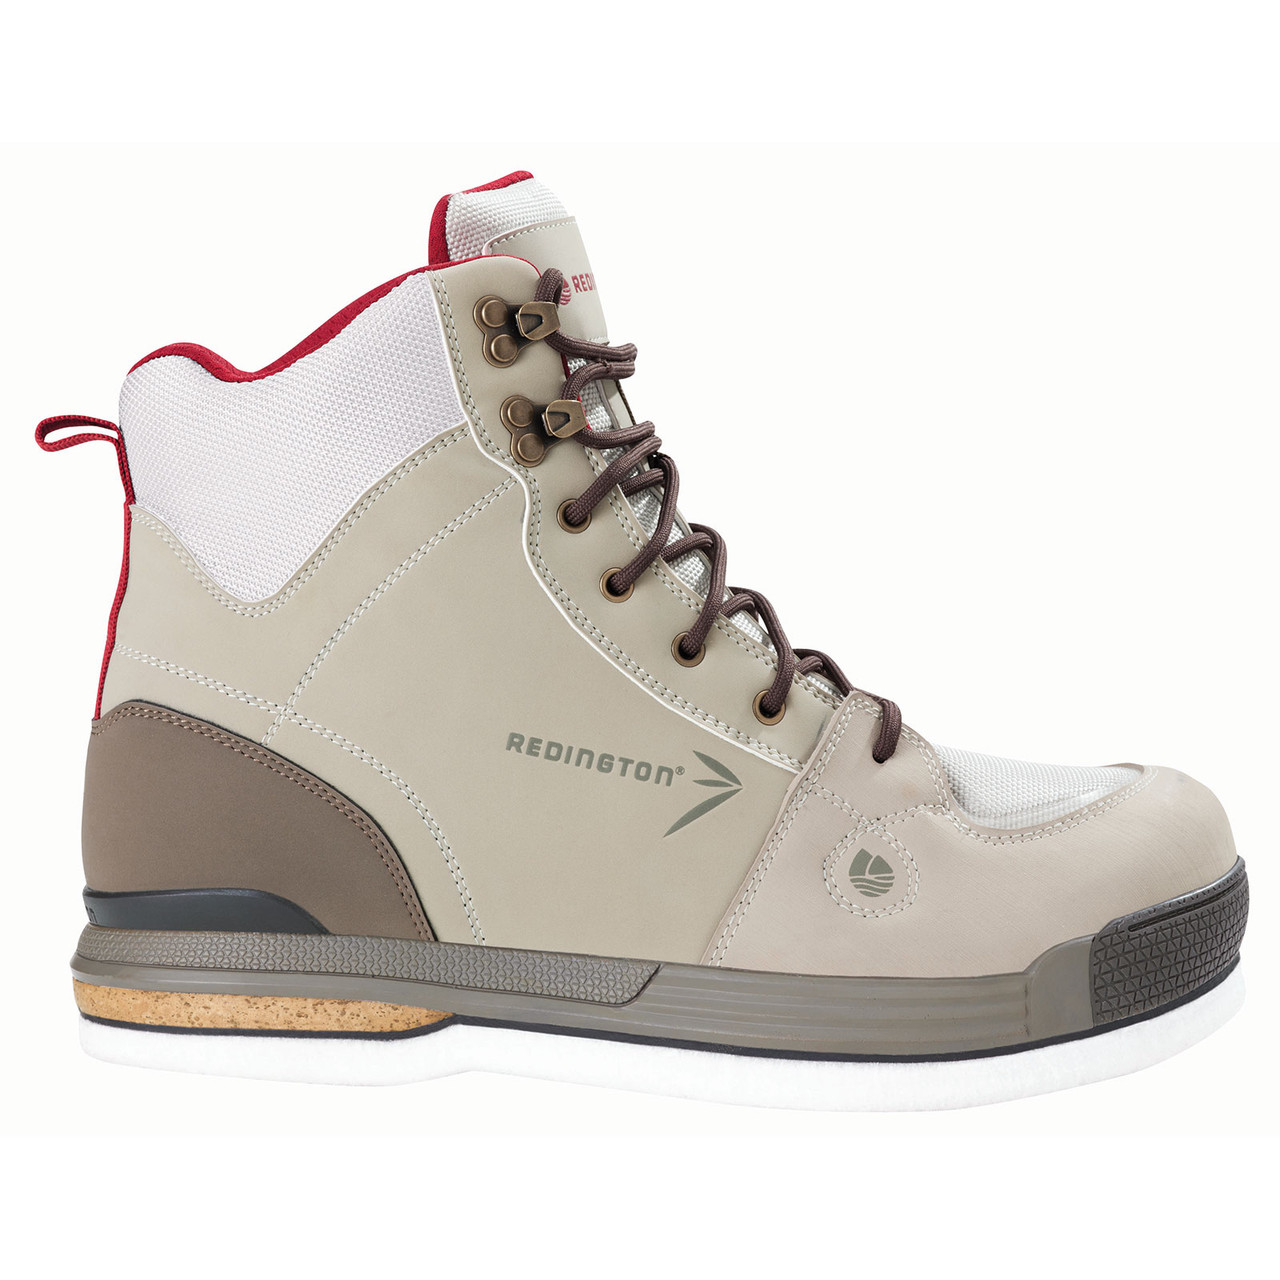 women's wading boots clearance